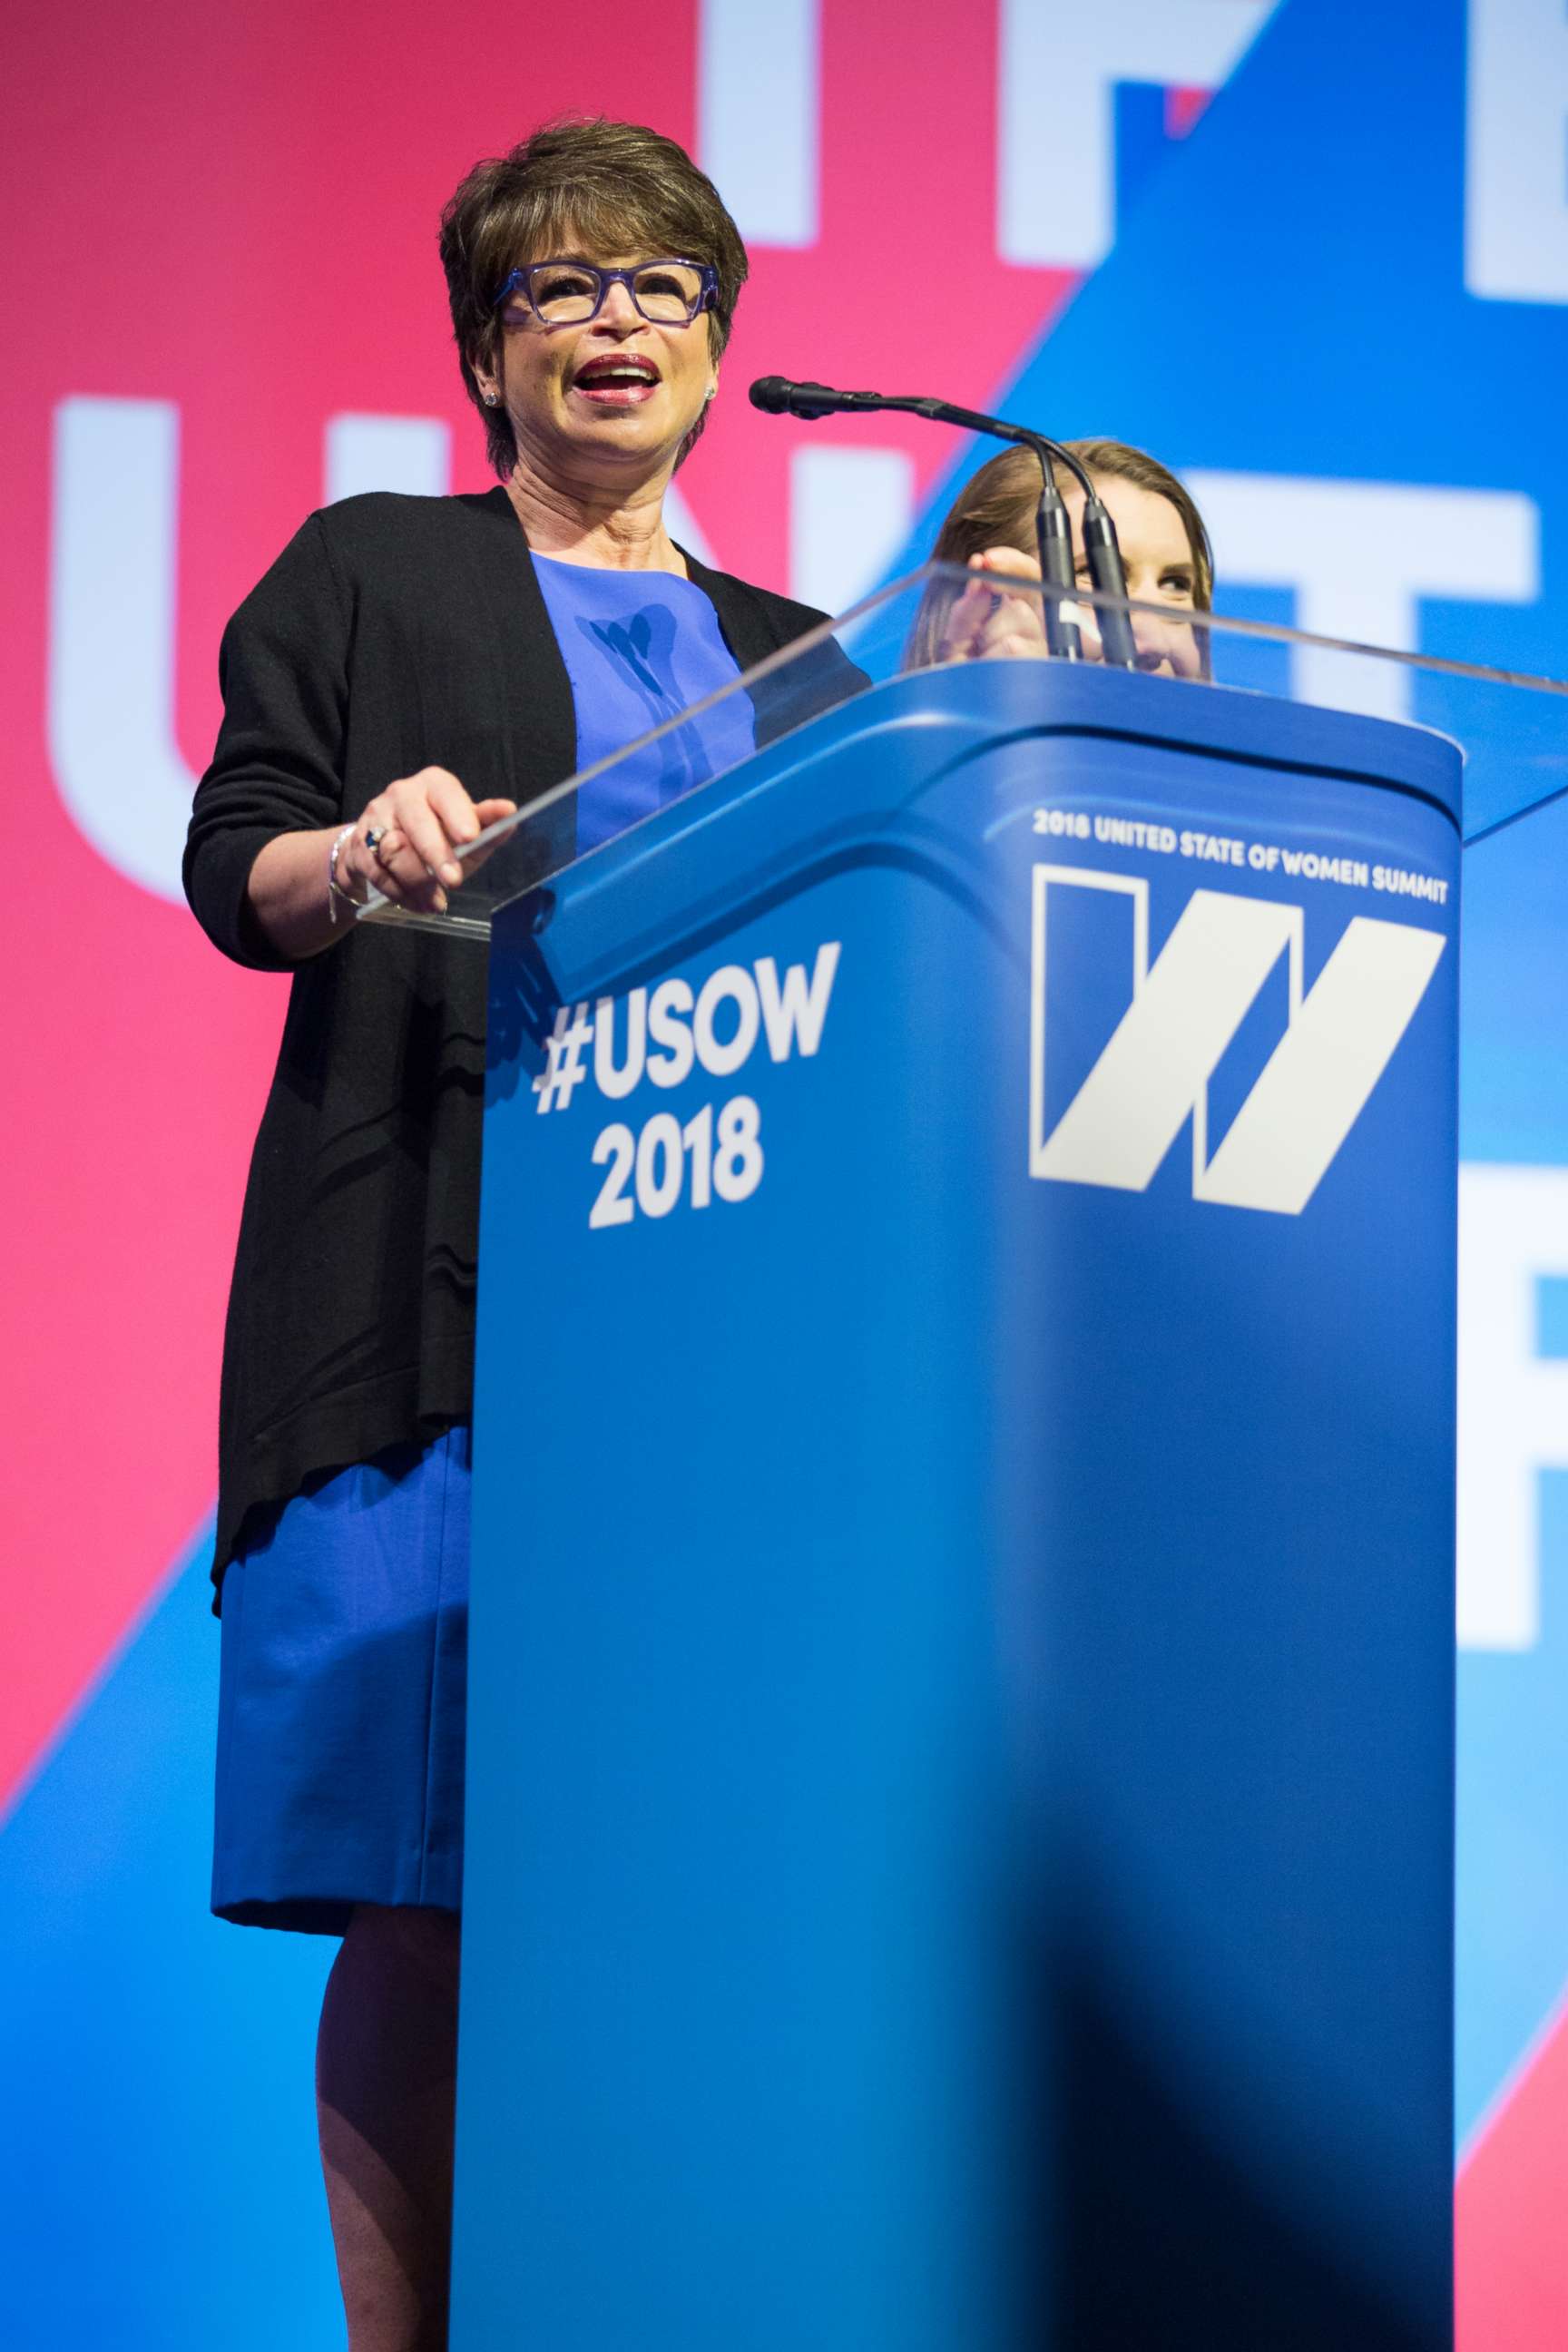 PHOTO: Valerie Jarrett, co-host of the 2018 United State of Women summit, speaks on stage at the Shrine Auditorium in Los Angeles, May 5, 2018.